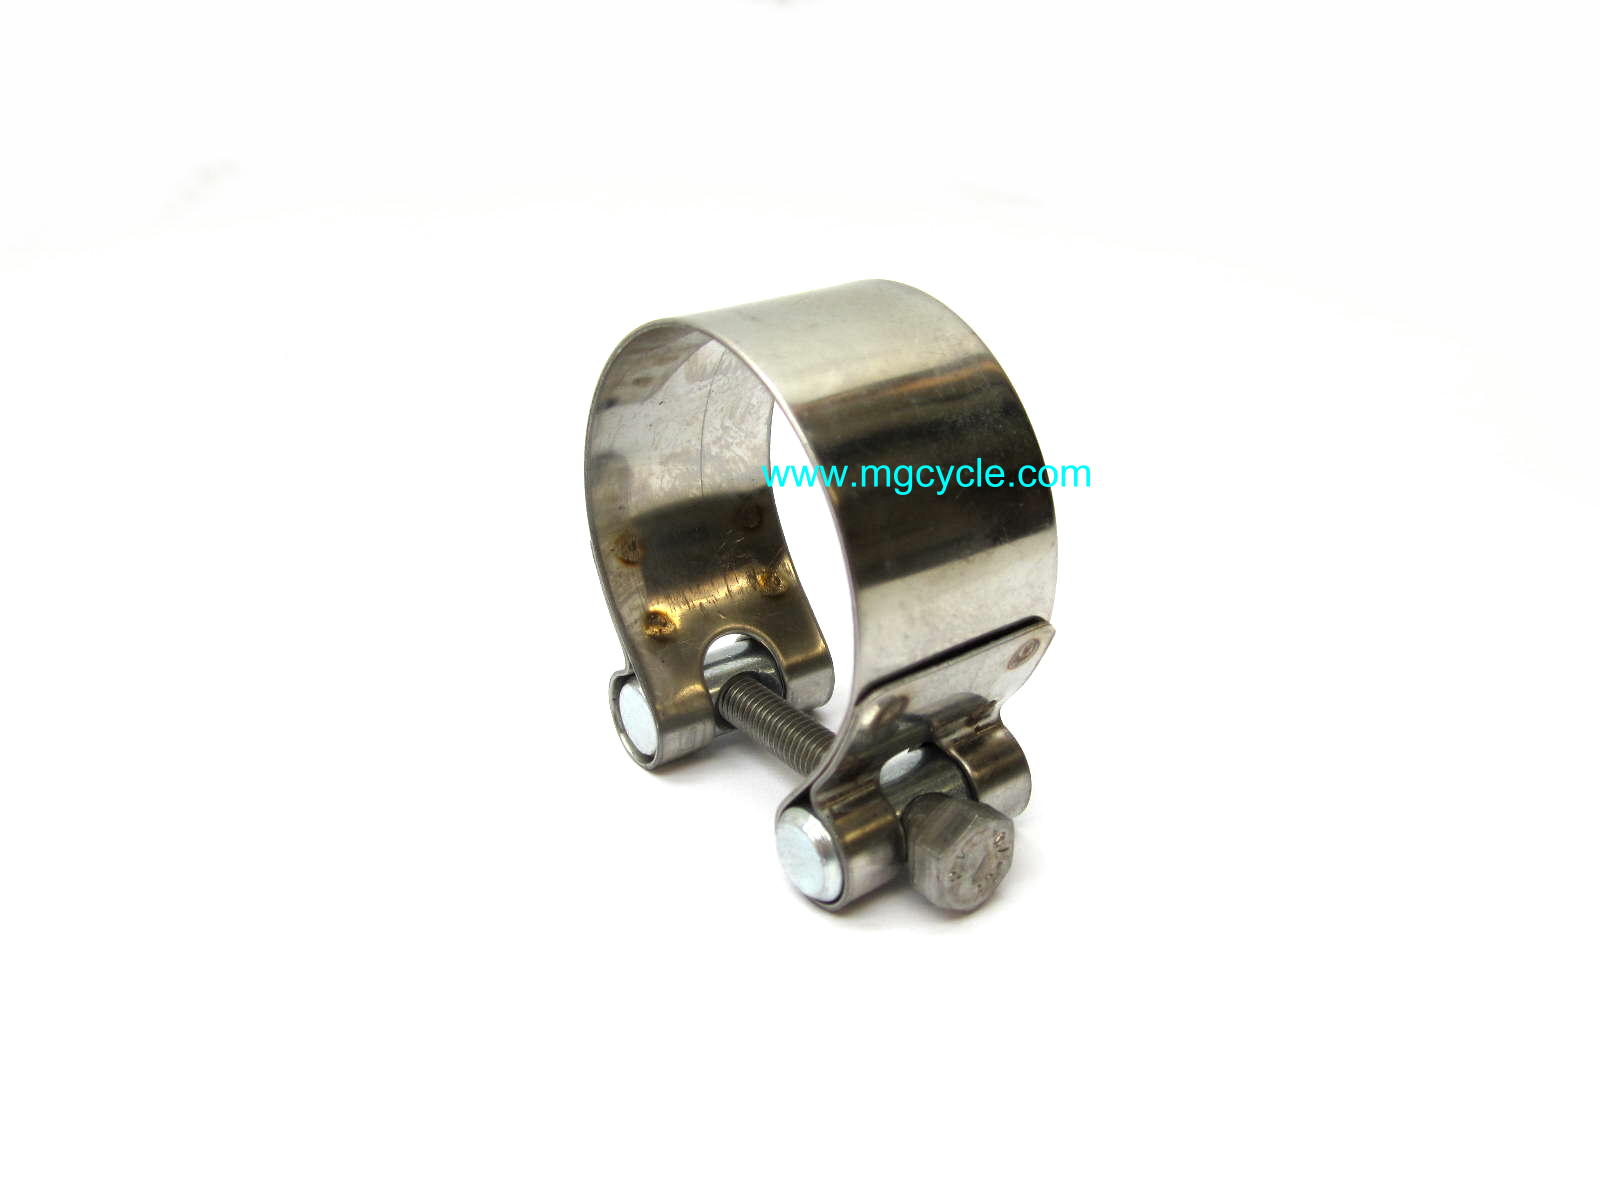 Stainless crossover clamp T/T3/Cal3/1100, V7 Sport muffler clamp - Click Image to Close